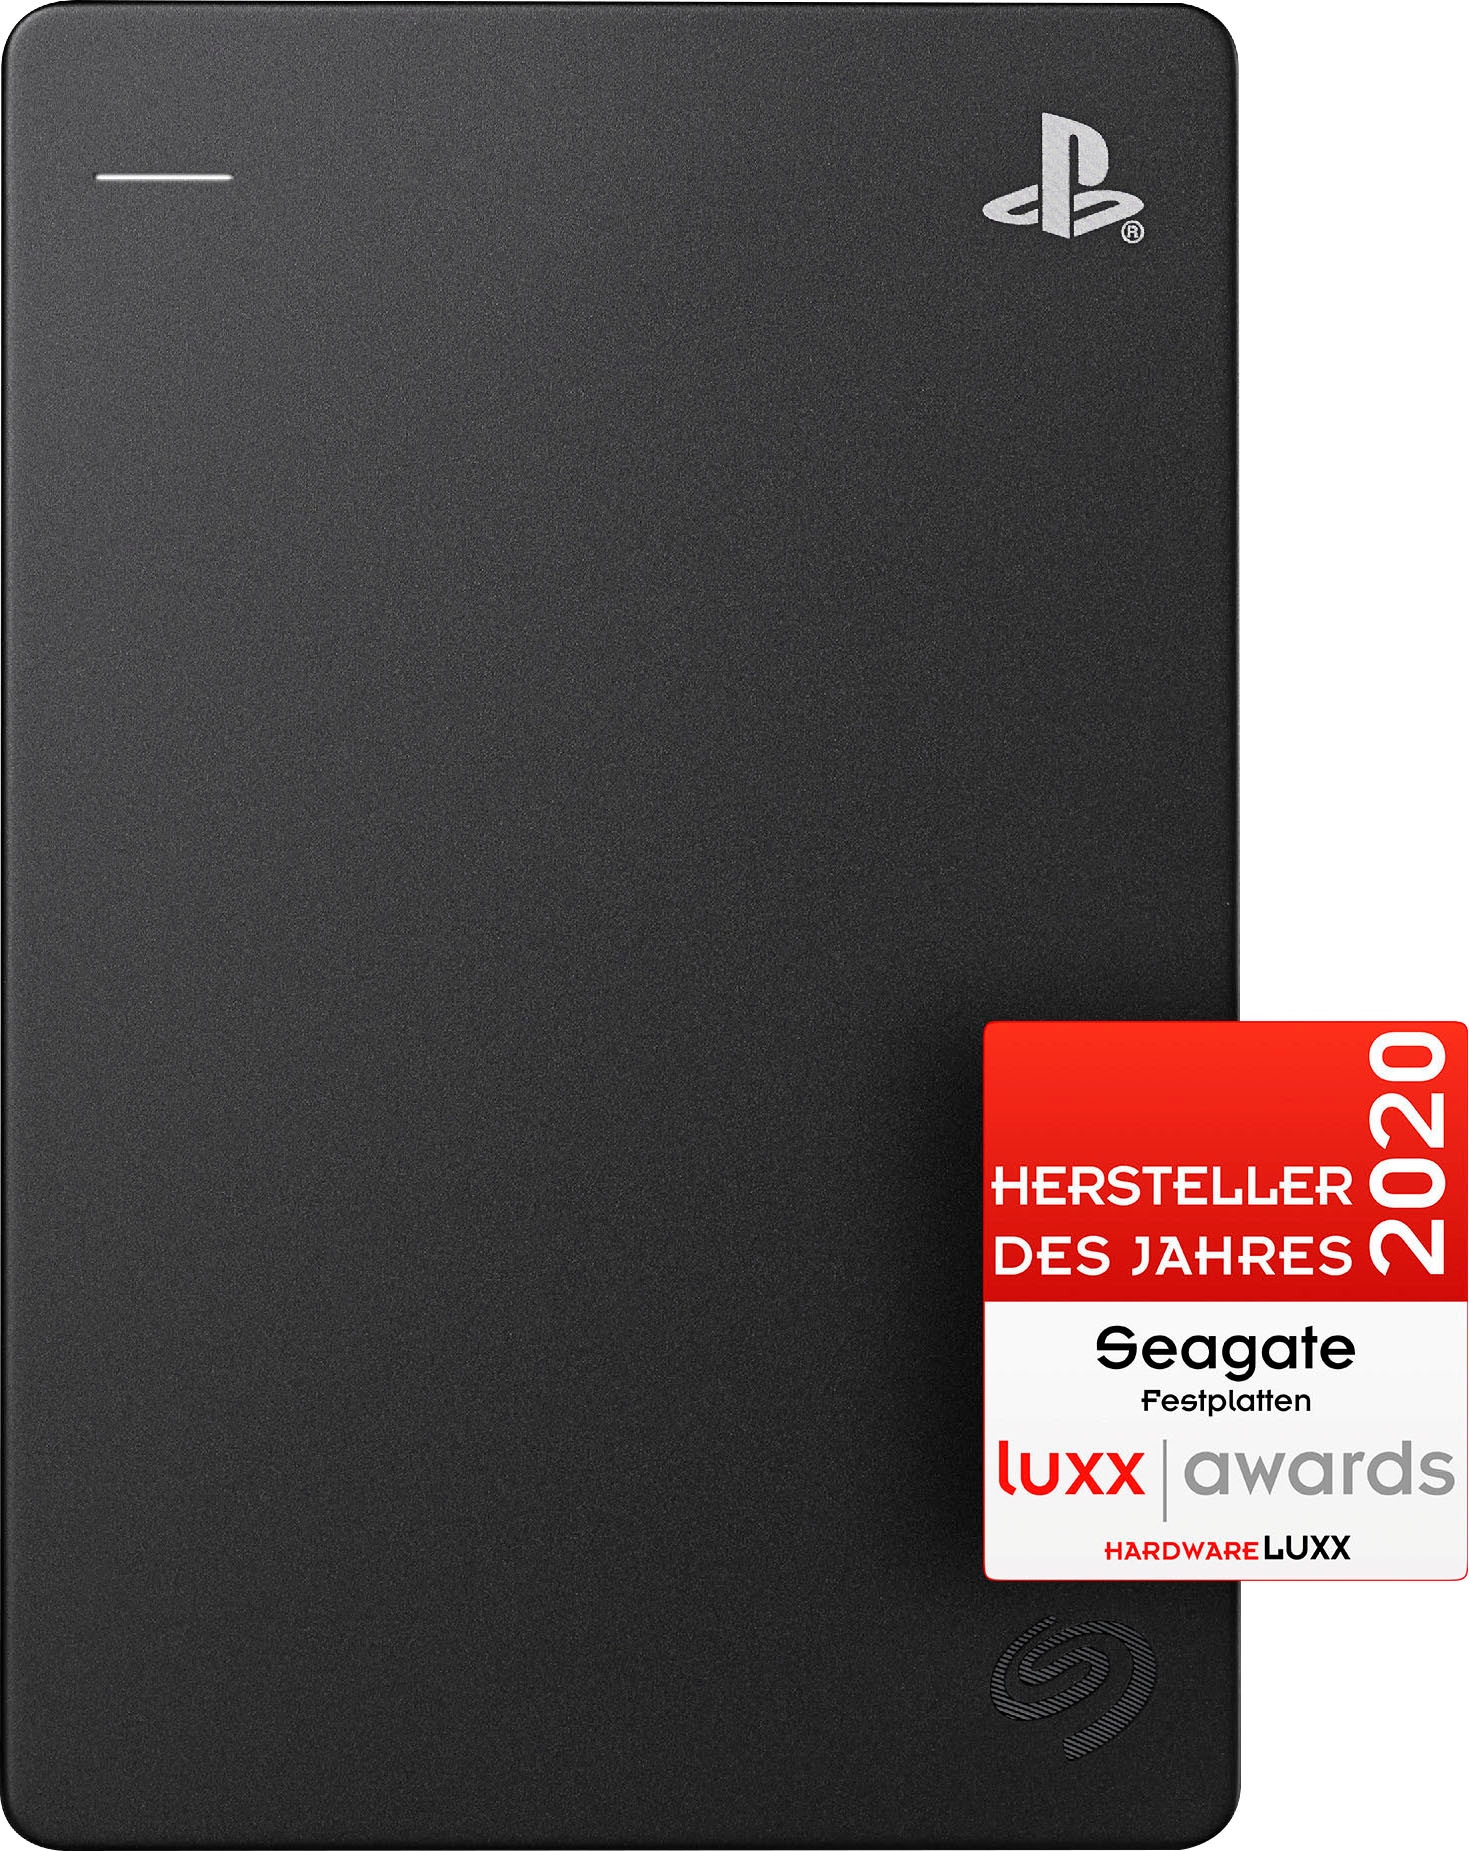 Seagate externe online Drive Anschluss Gaming-Festplatte USB STGD2000200«, PS4 3.2 UNIVERSAL bei Zoll, 2,5 »Game